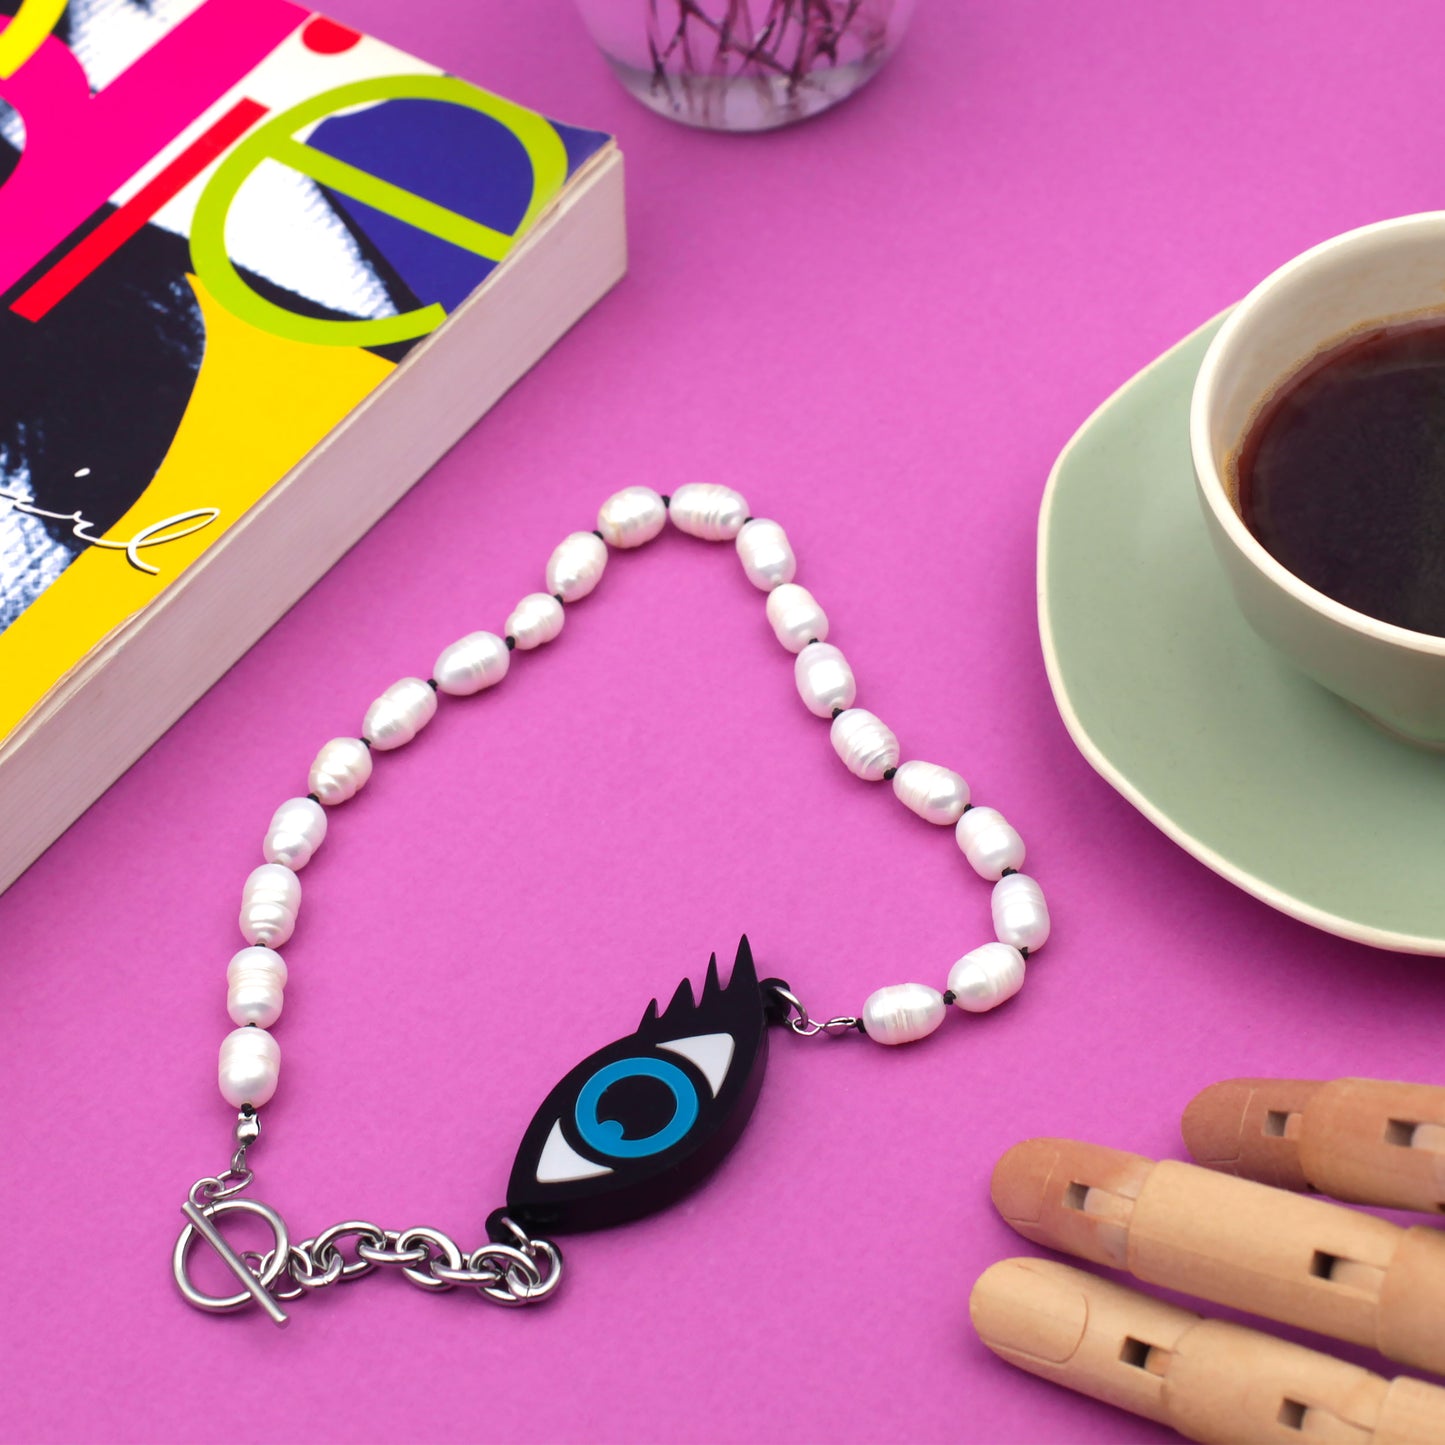 Laser cut evil eye and freshwater pearls necklace on a pink background with a book and a green coffee cup. 